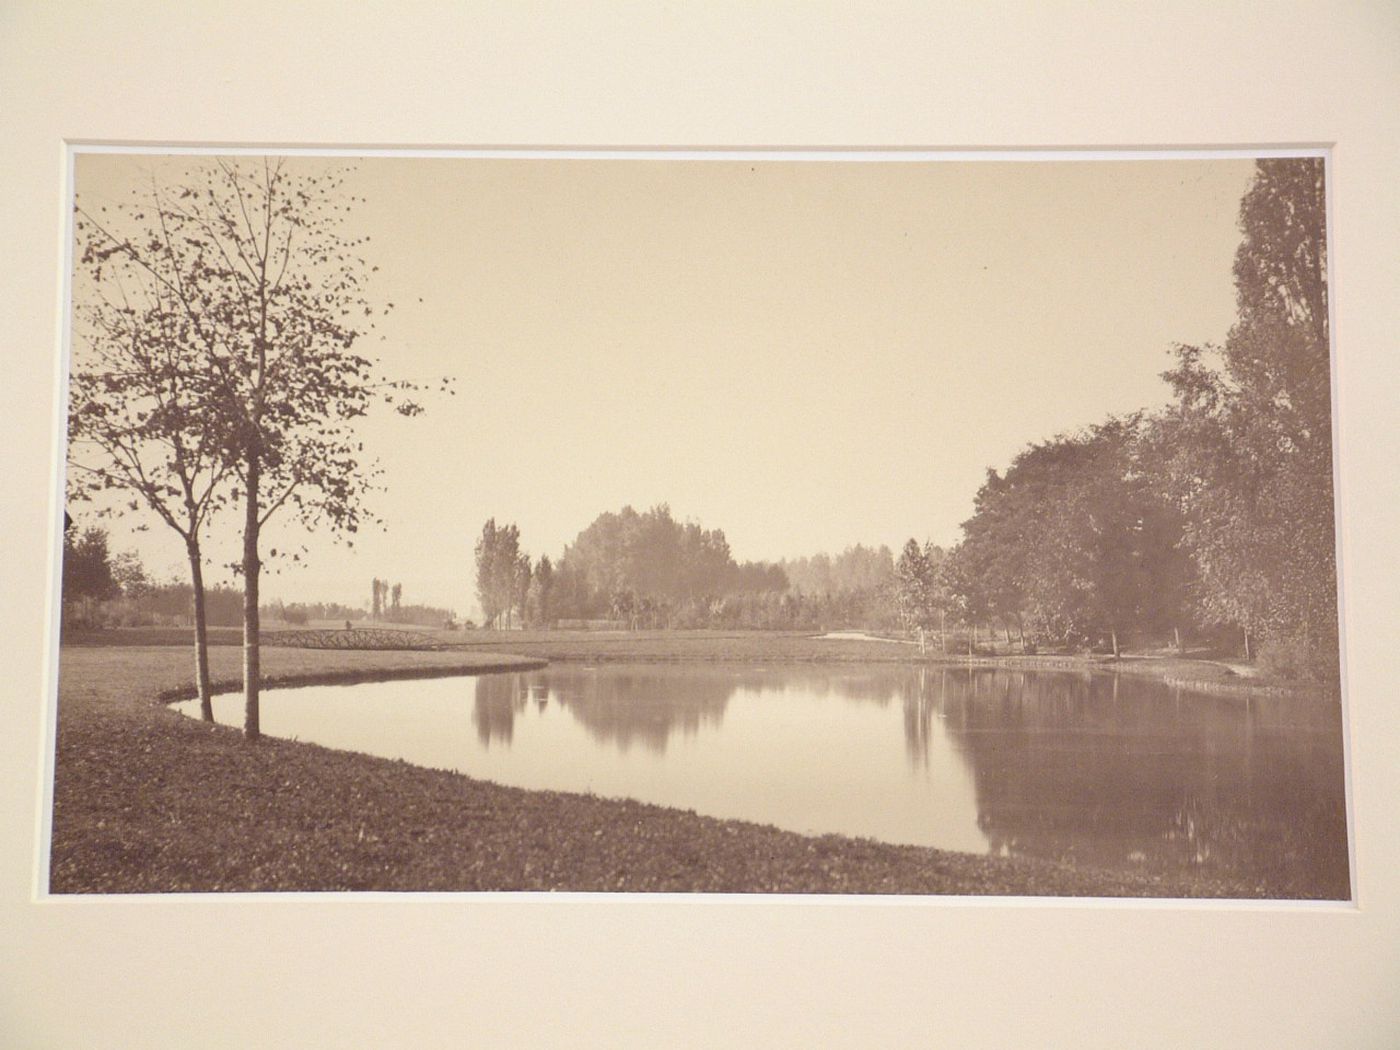 View of a lake, with two small trees at left, Bois de Boulogne, Paris, France